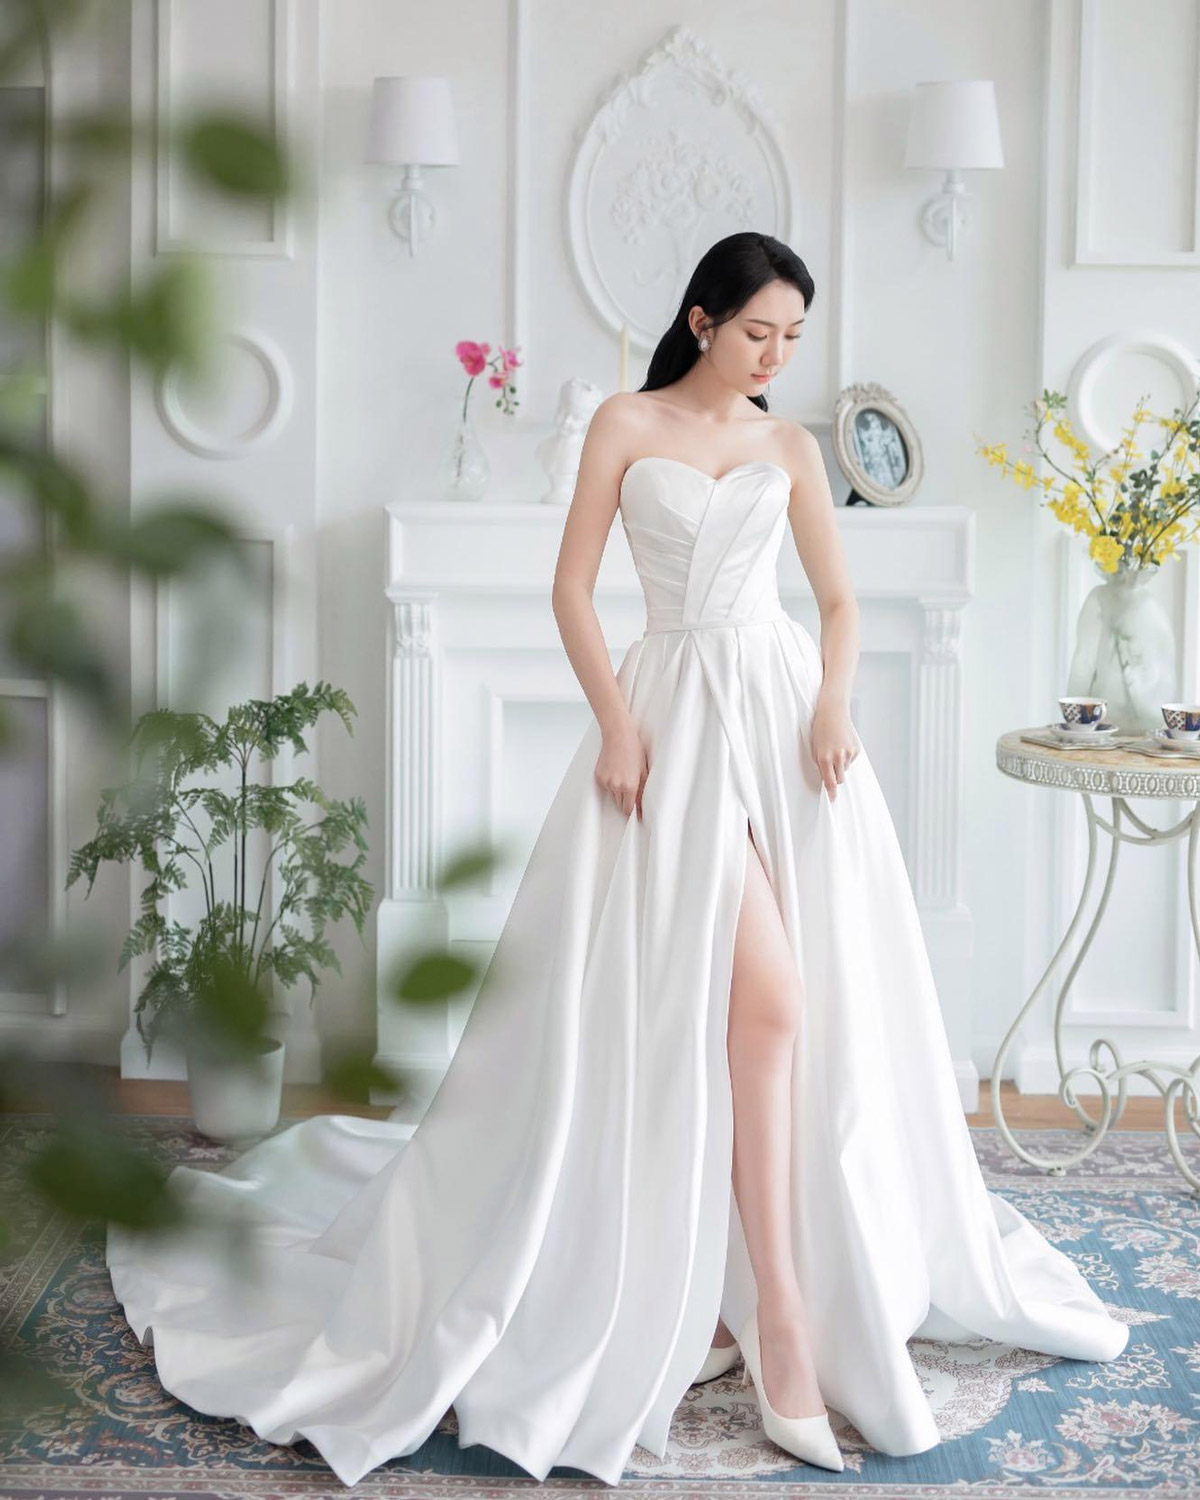 Say “Yes” to These Gowns by My Dream Wedding